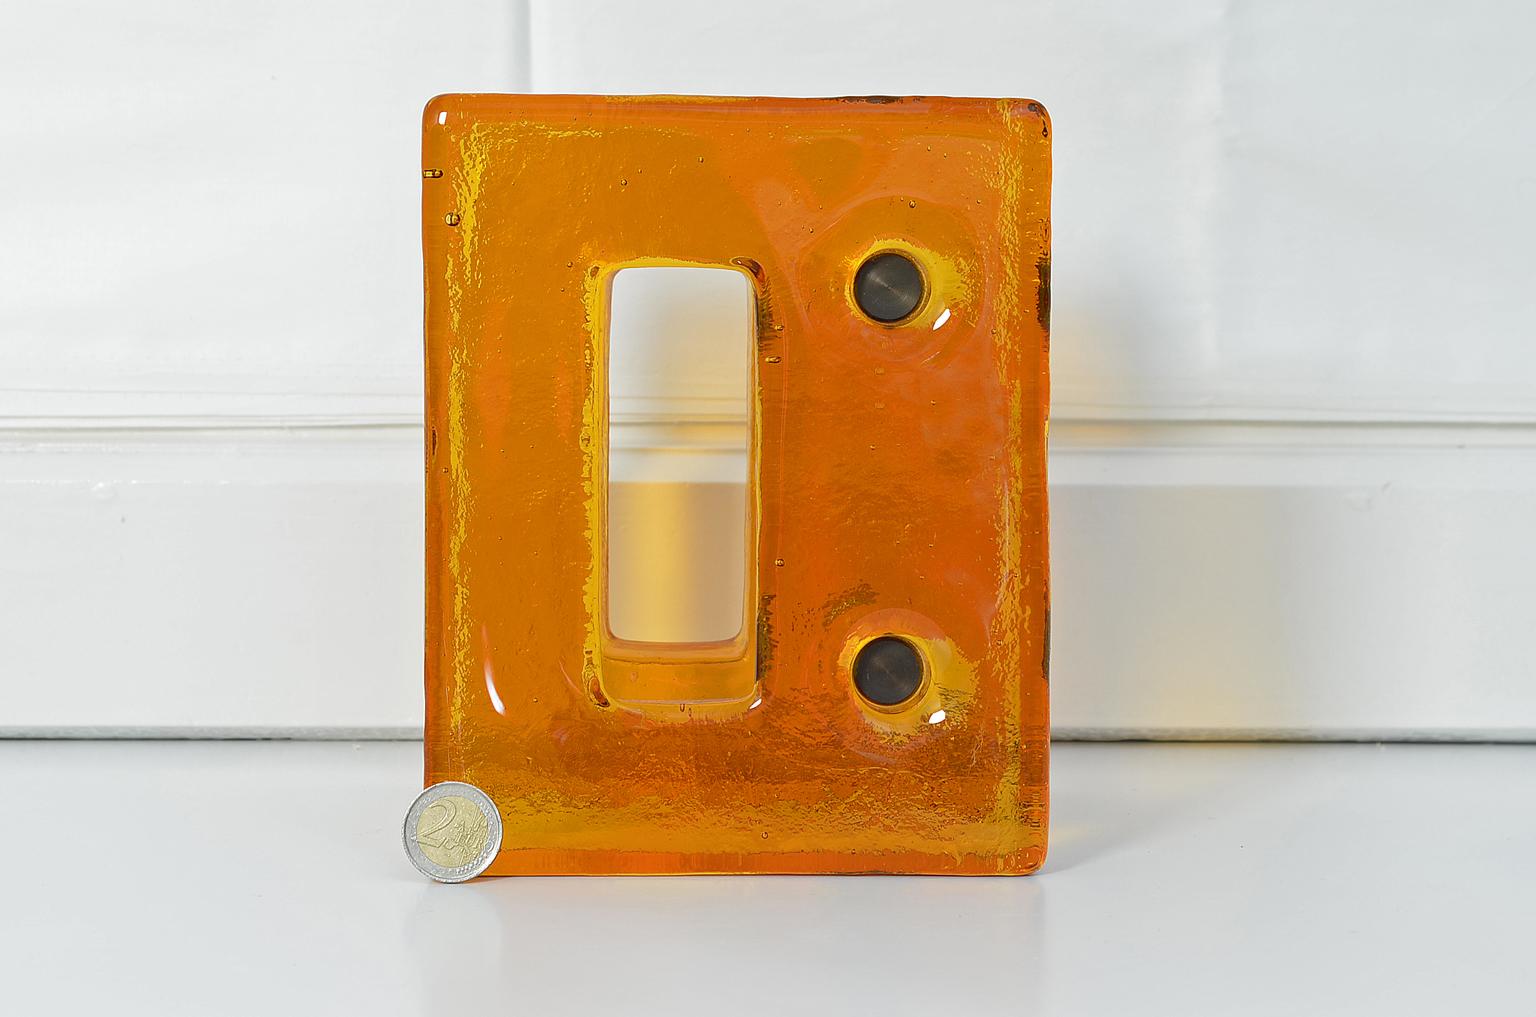 Push and pull door handle in orange glass with brass fittings, France, 1970s.